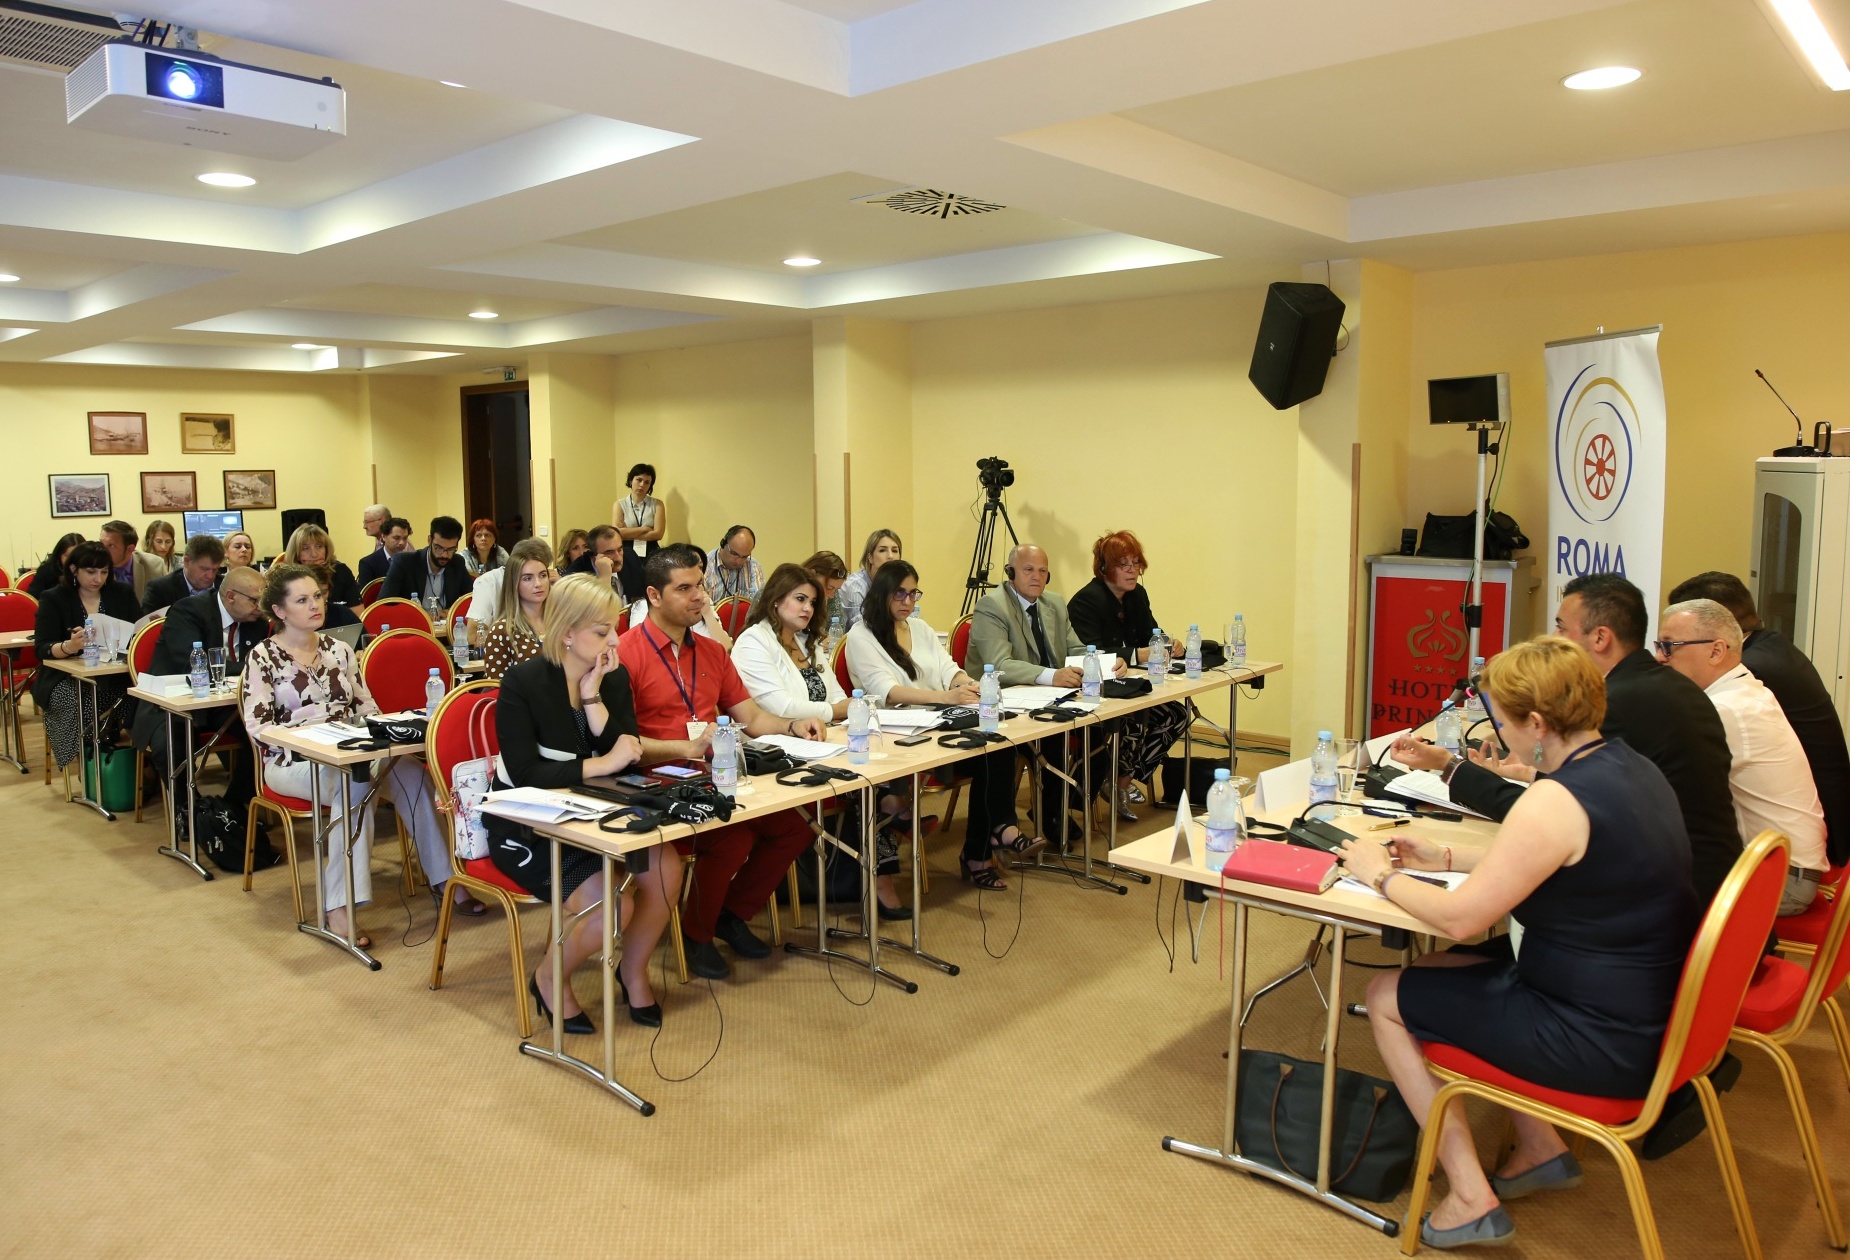 Participants of the “Holistic Approach to Housing for Roma in the Enlargement Region” conference, organized by the Regional Cooperation Council (RCC)’s Roma Integration 2020 (RI2020) Action Team, in Bar (Montenegro), on 31 May 2018. (Photo: RCC/Radonja Srdanovic)